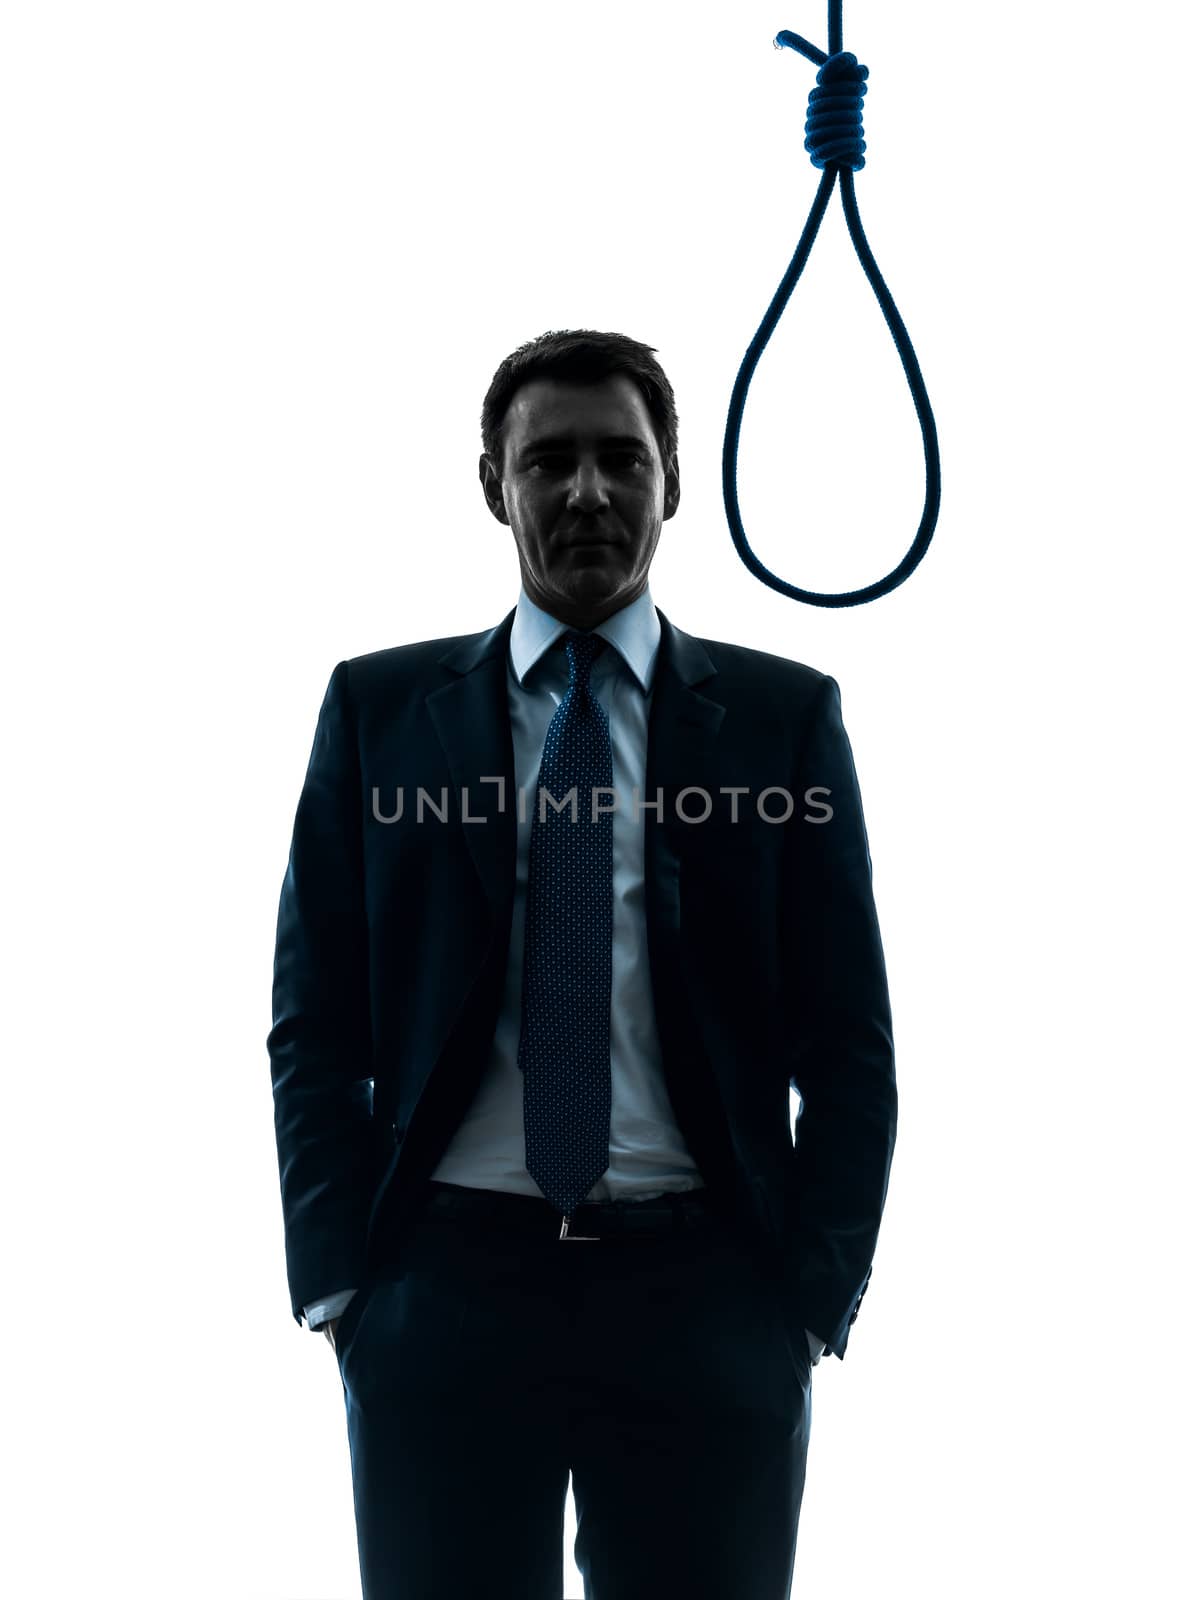 one caucasian man judge standing in front of hangman's noose in silhouette studio isolated on white background